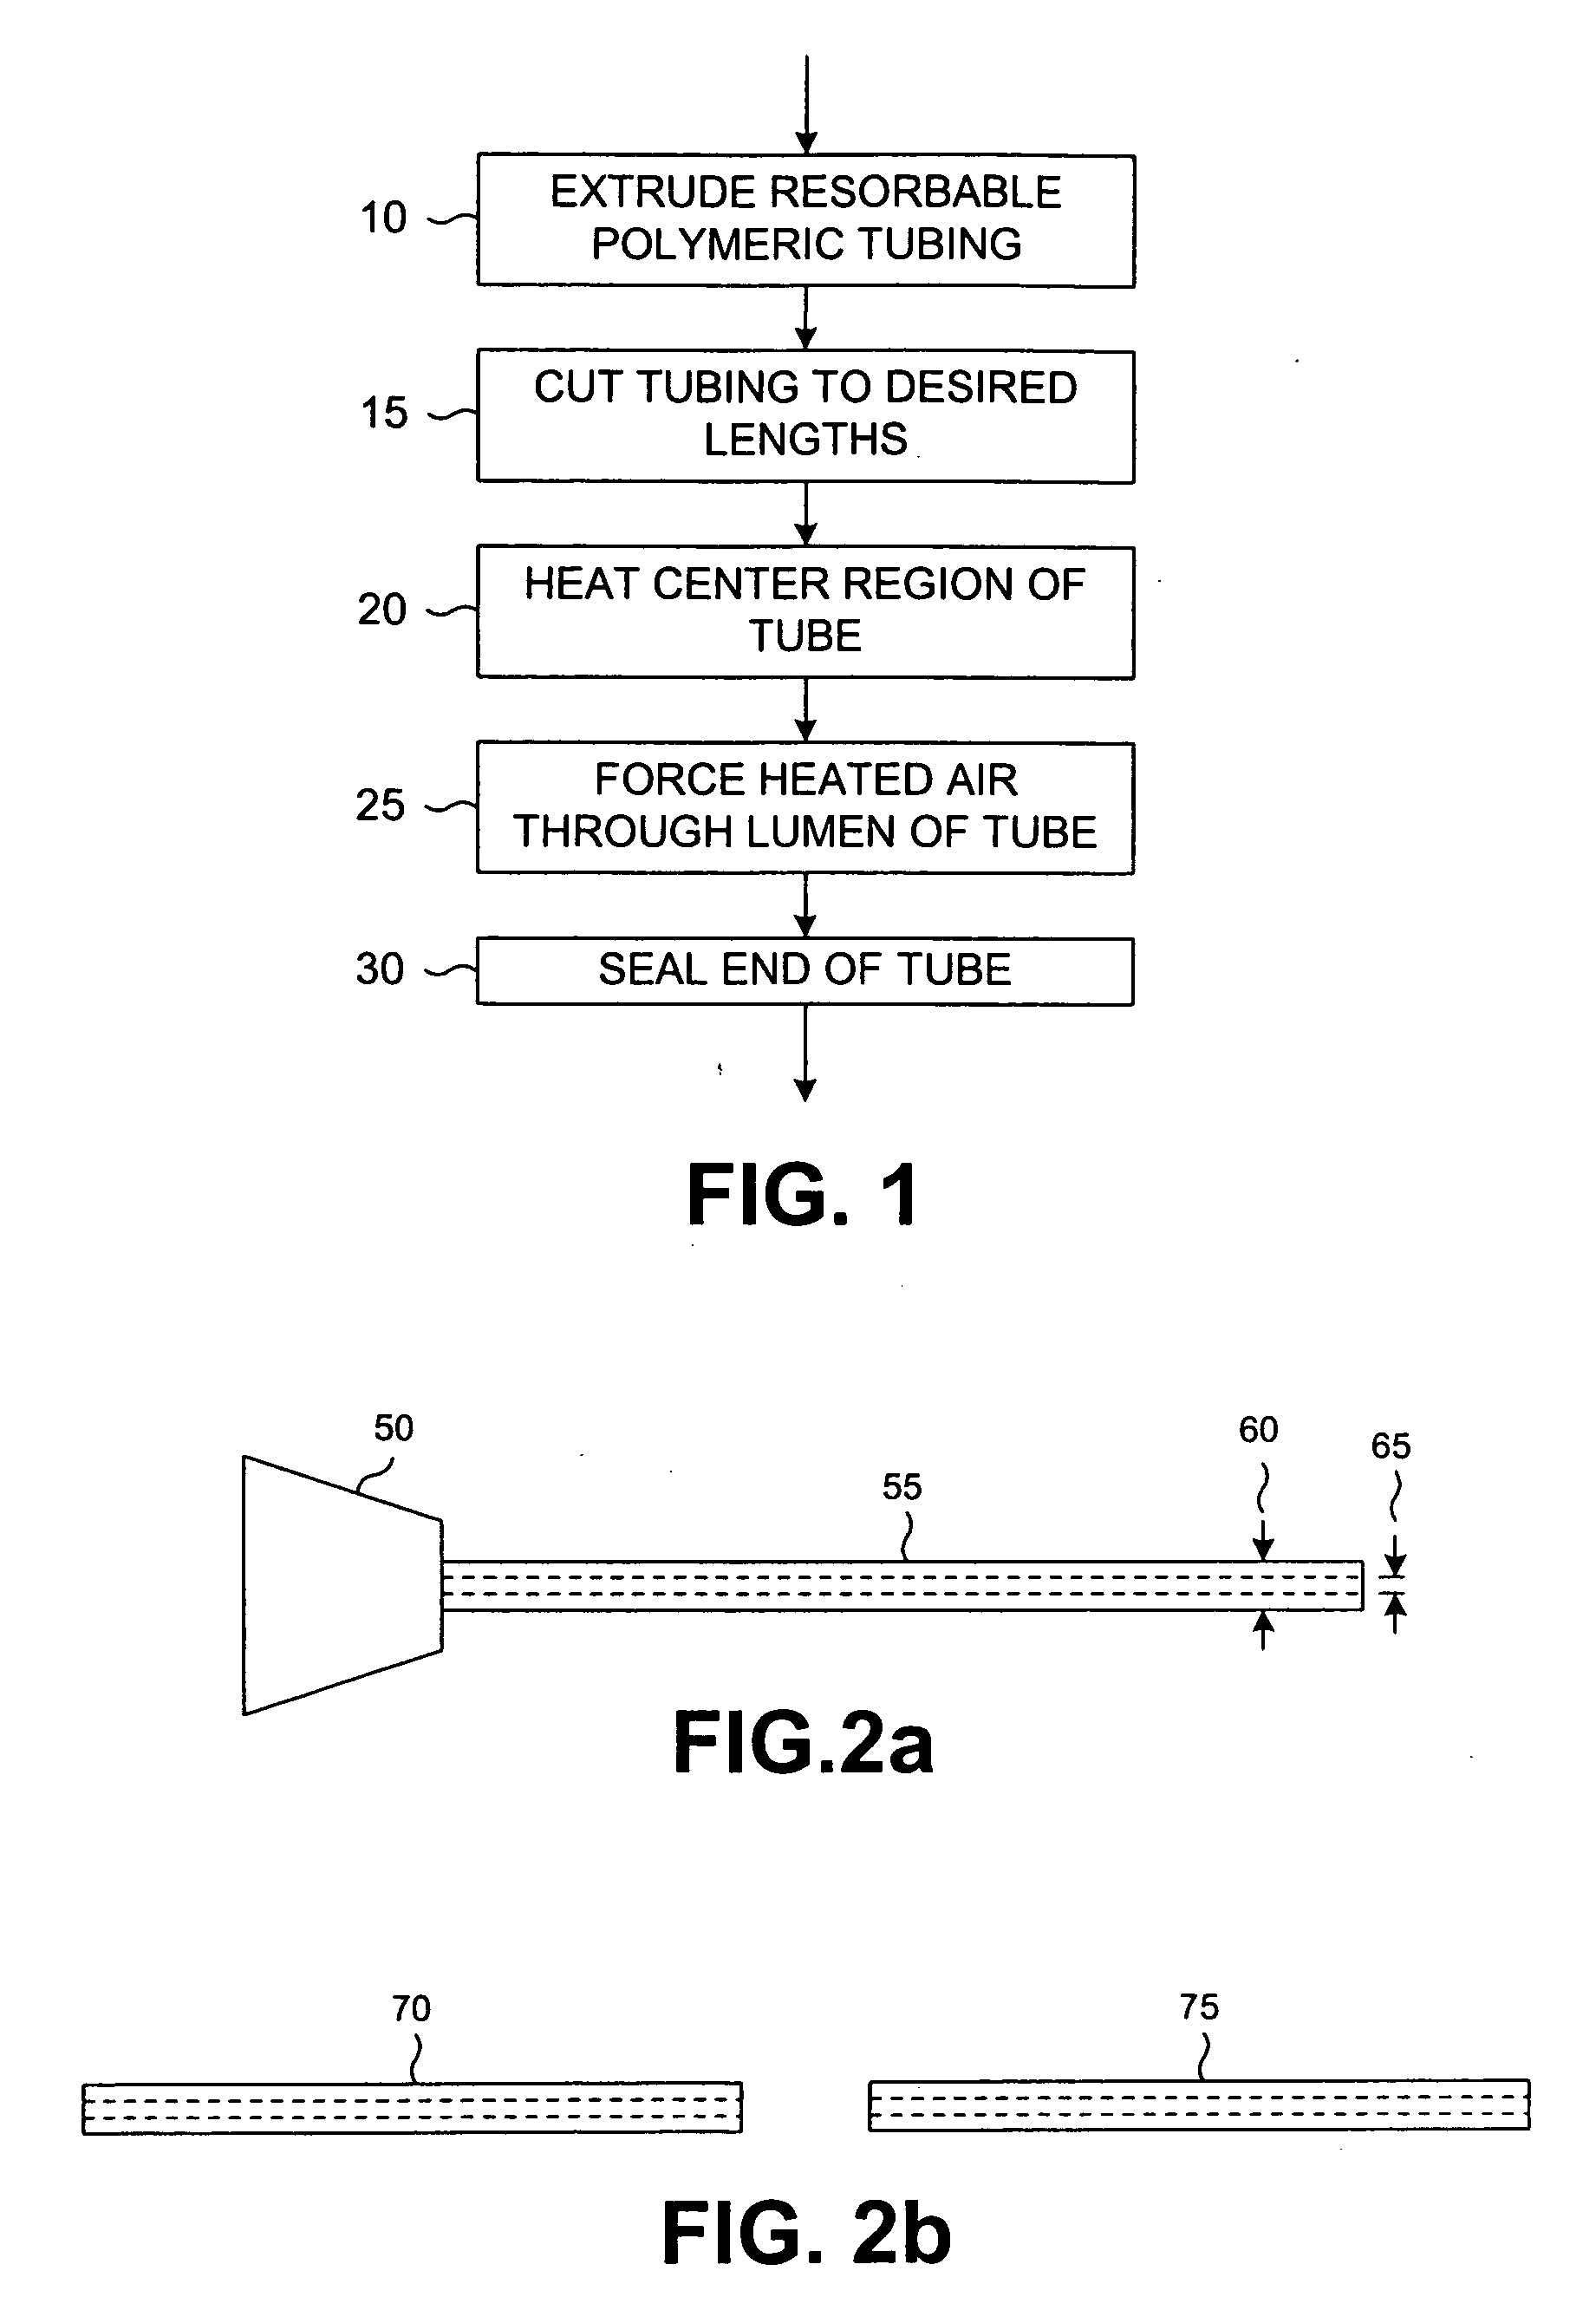 Resorbable hollow devices for implantation and delivery of therapeutic agents